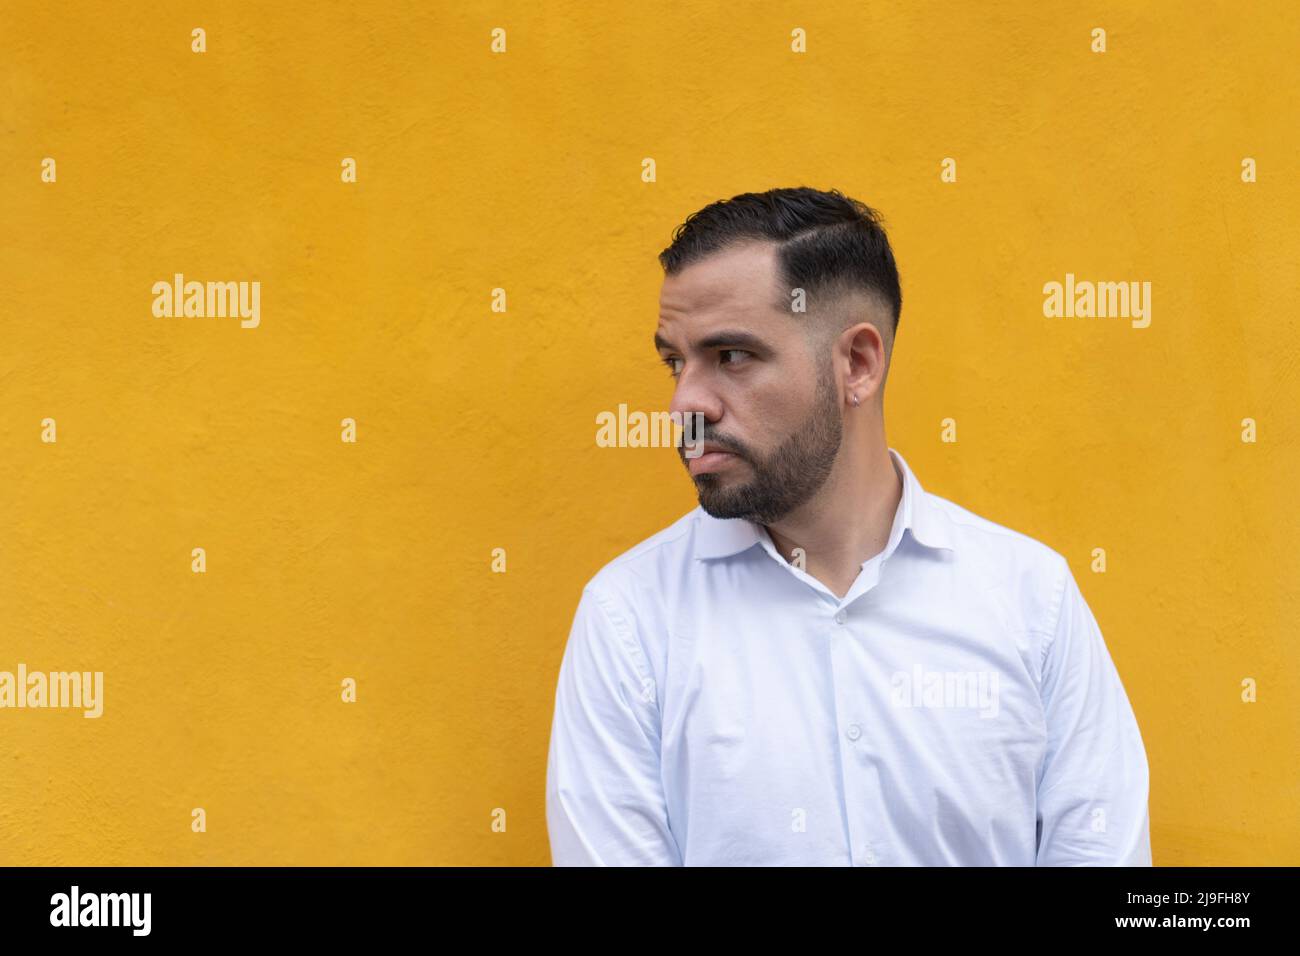 Latin man standing in front of a yellow wall. He is looking to the side with seriousness Stock Photo